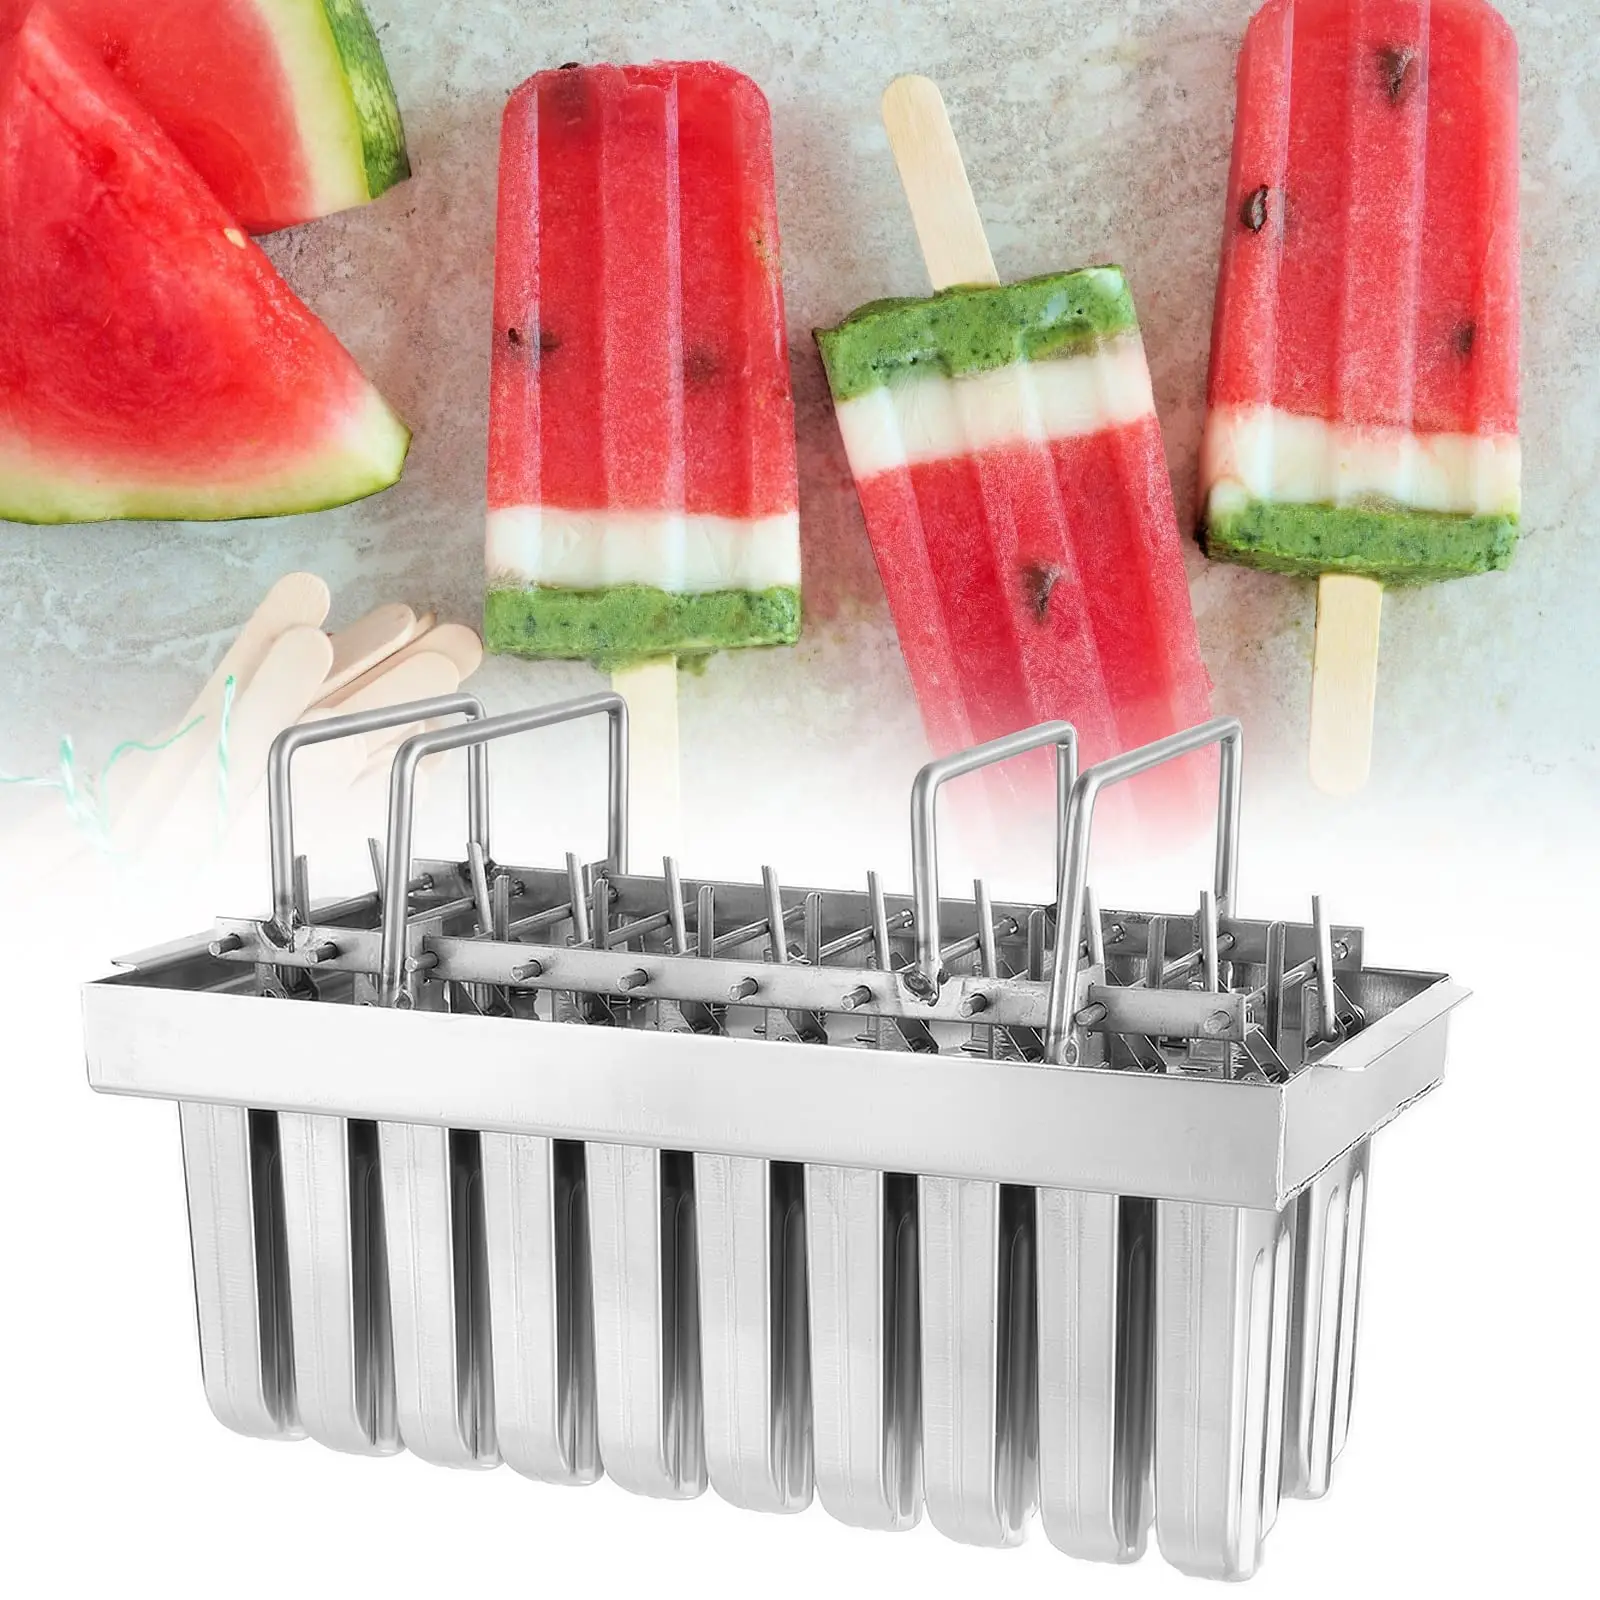 Commercial stainless steel popsicle molds Metal Popsicle Mold Set of 6 Round Head Stainless Steel Ice Lolly Molds with Holder